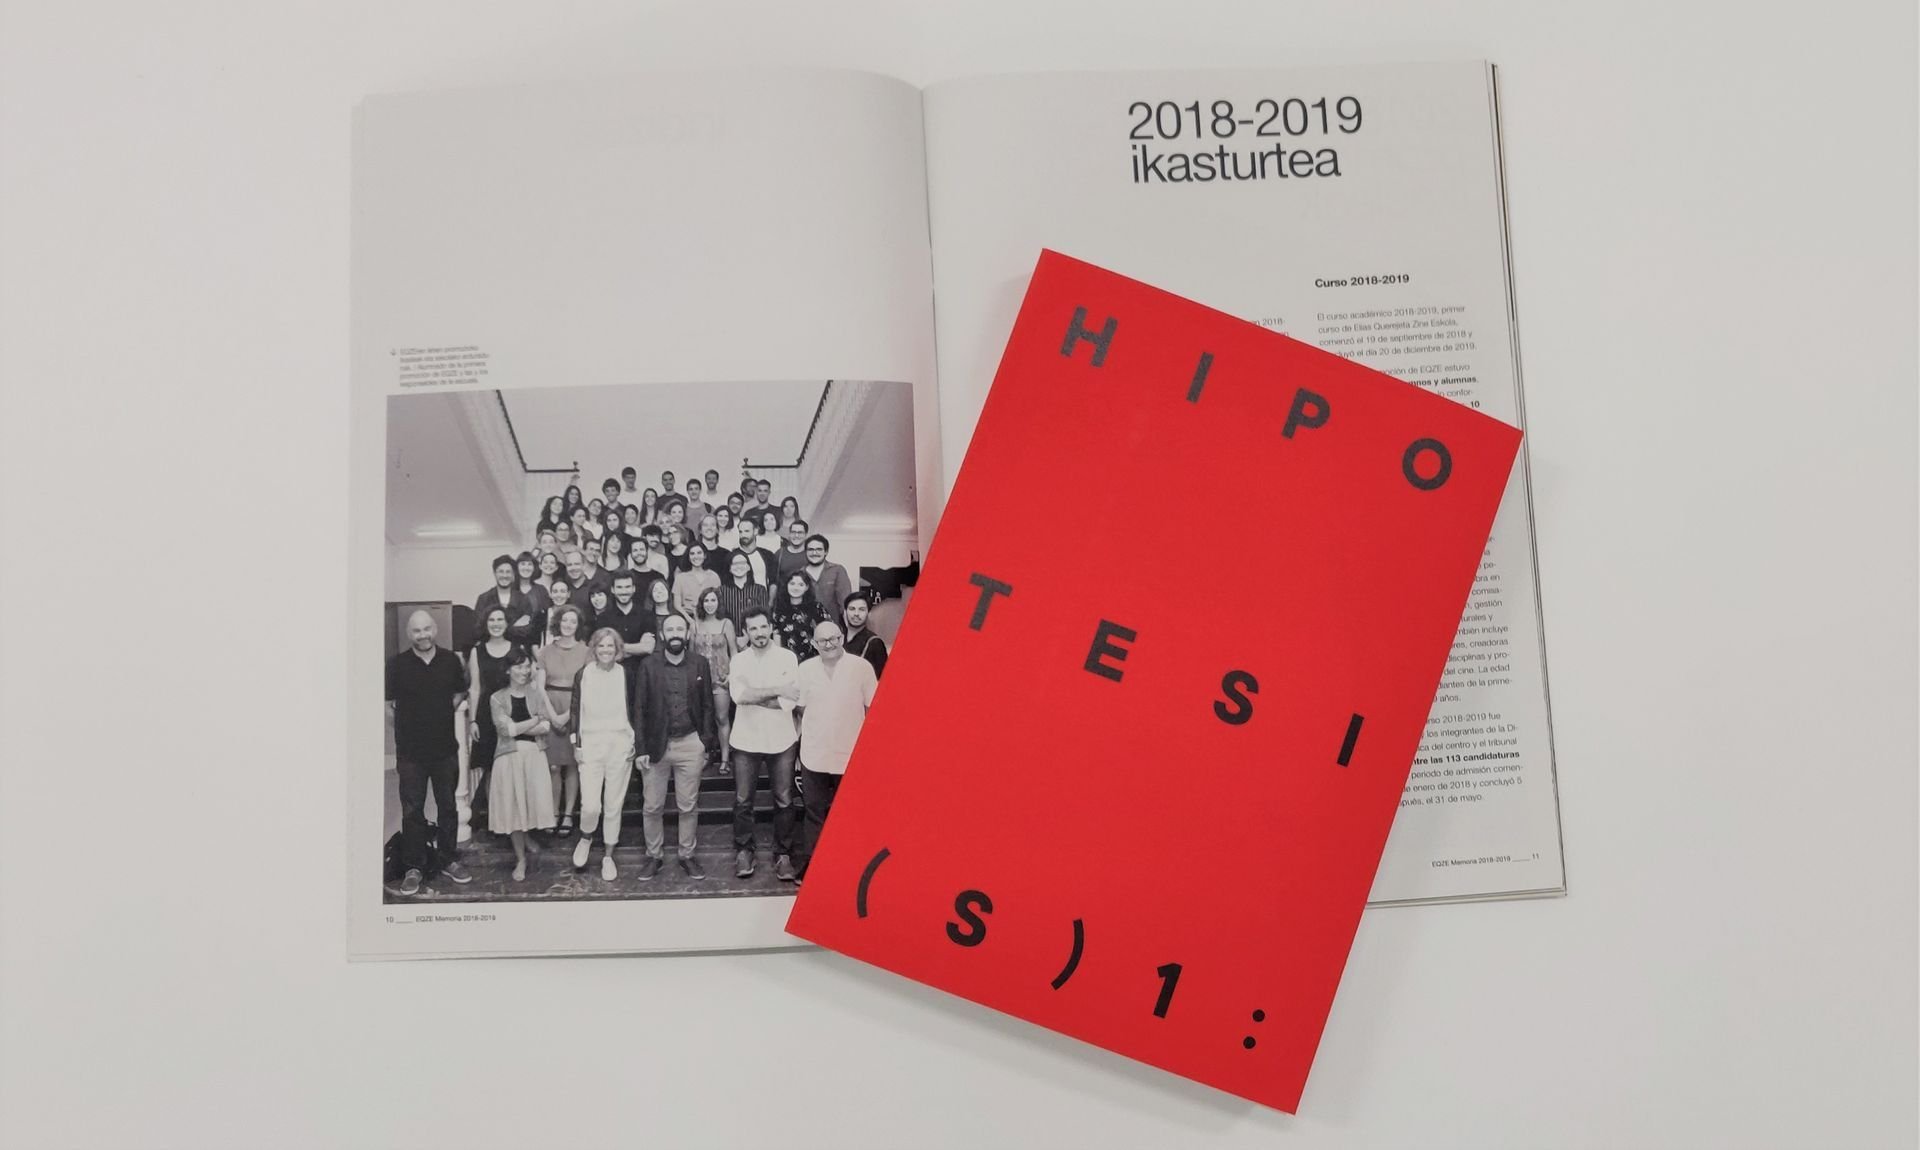 The Elías Querejeta Film School publishes its report on the 2018-2019 Academic Year